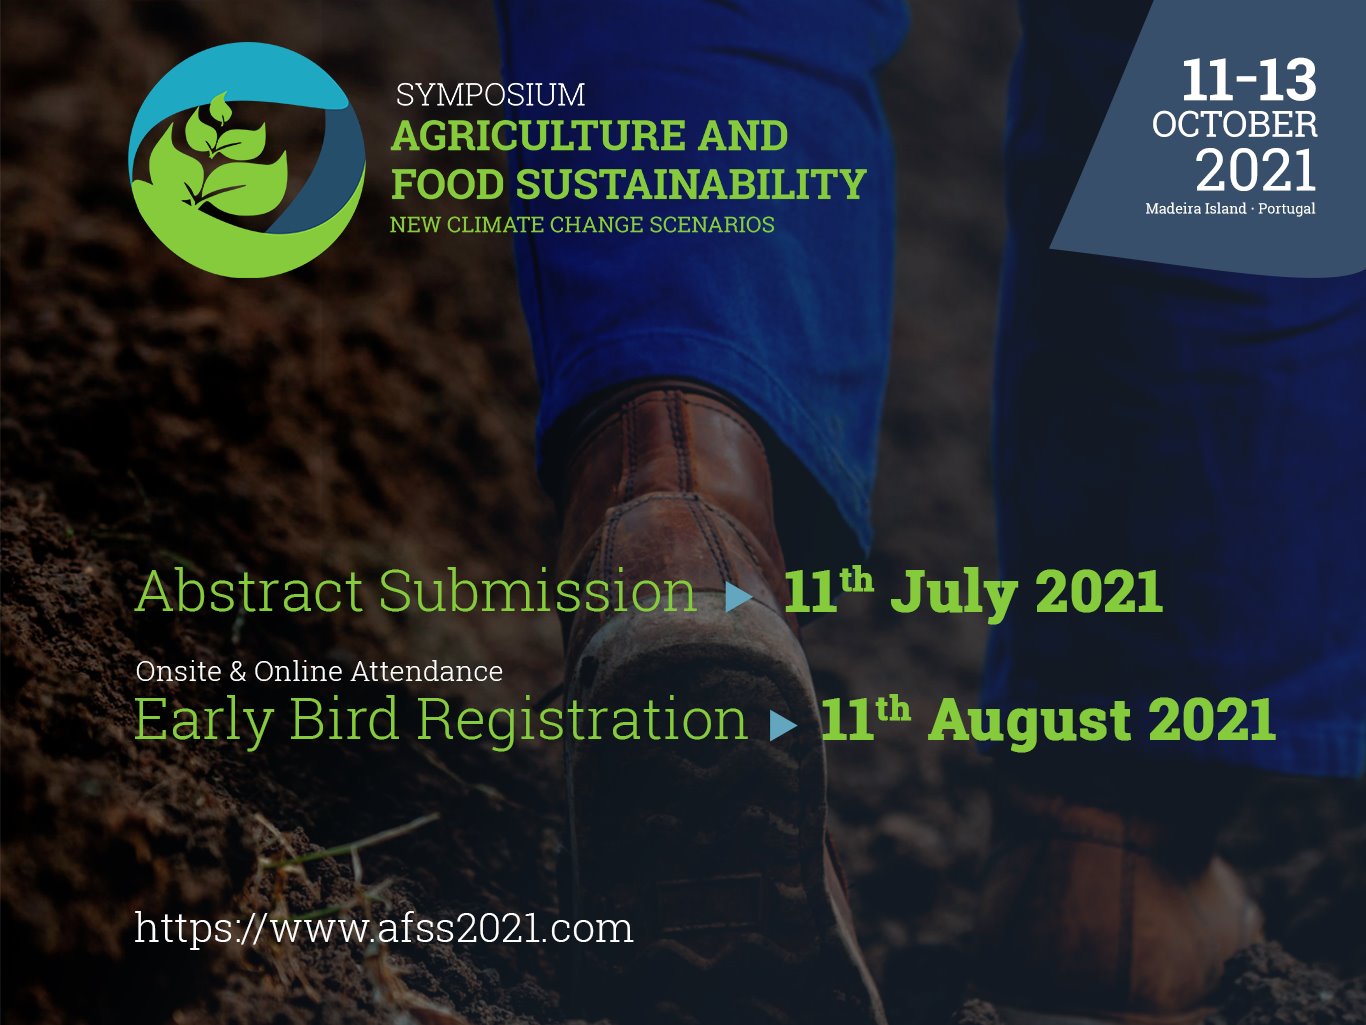 Symposium “Agriculture and Food Sustainability: New Climate Change Scenarios”